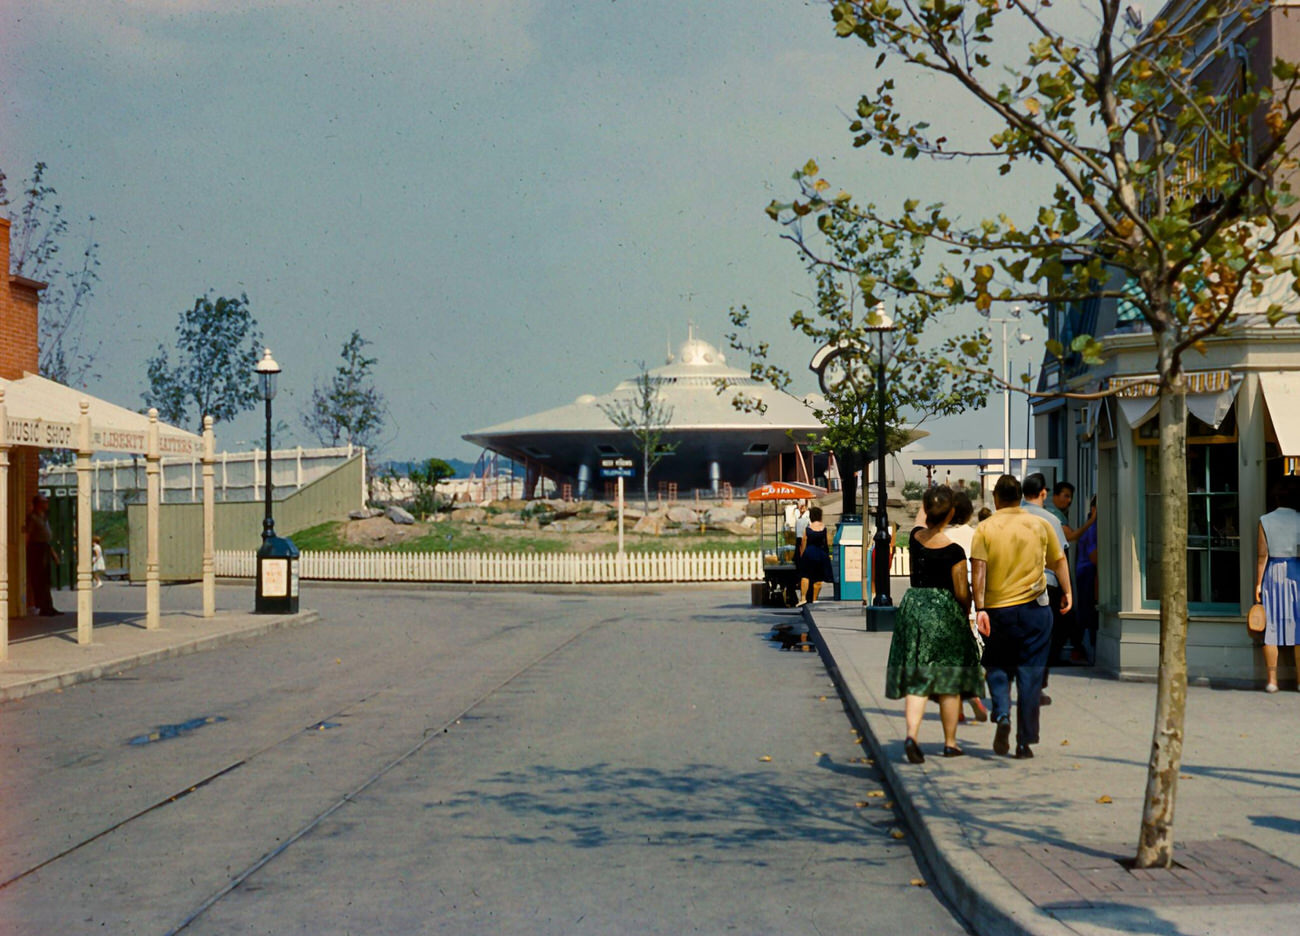 The Braniff Airways Space Ship Attraction At Freedomland Usa Theme Park In The Bronx, In 1961, Features A Fritos Snack Cart Serving Visitors.